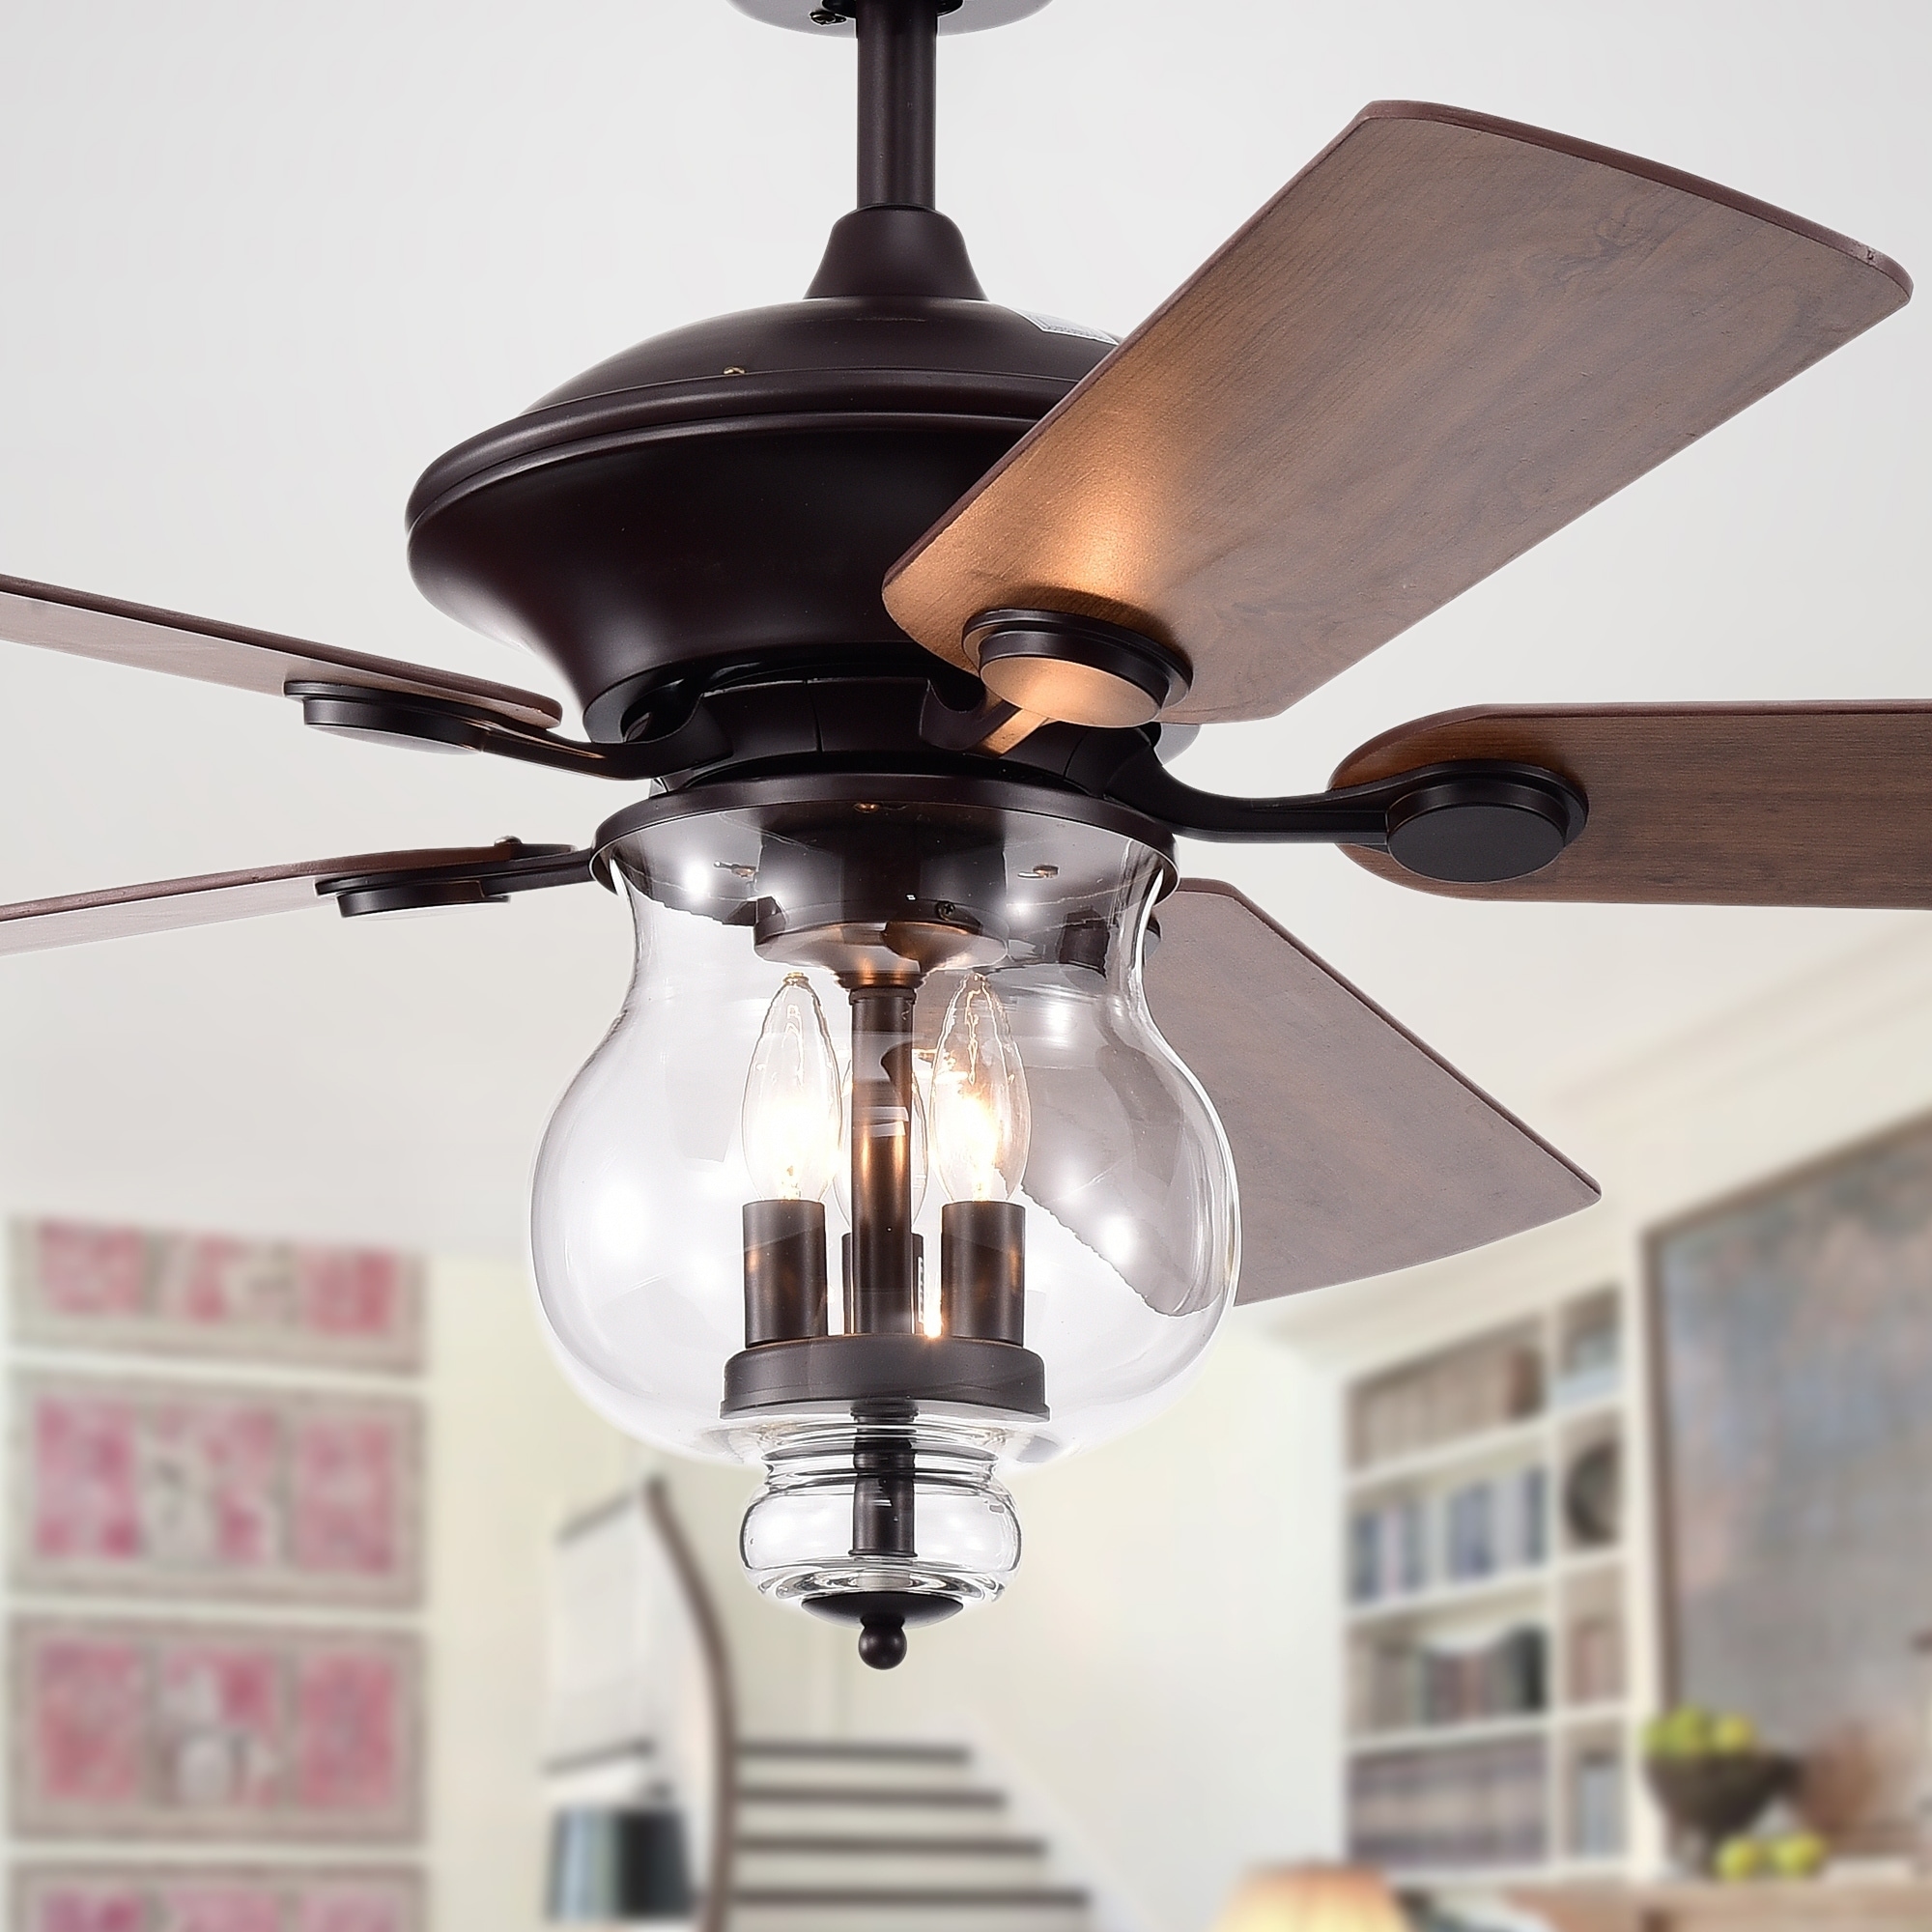 Topher 52 Inch 5 Blade Antique Bronze Lighted Ceiling Fans With Clear Glass Shade Optional Remote Control